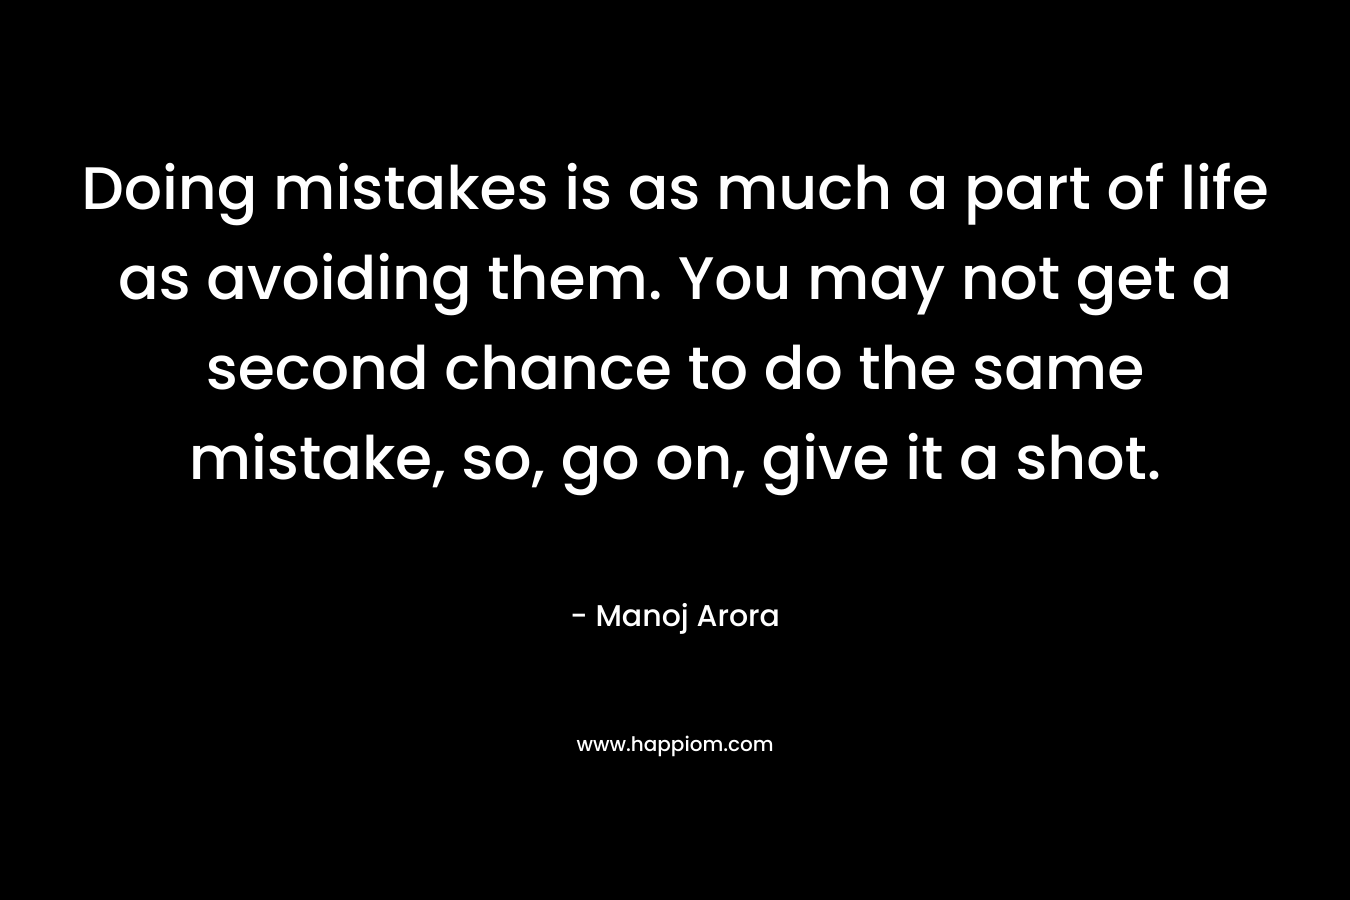 Doing mistakes is as much a part of life as avoiding them. You may not get a second chance to do the same mistake, so, go on, give it a shot.